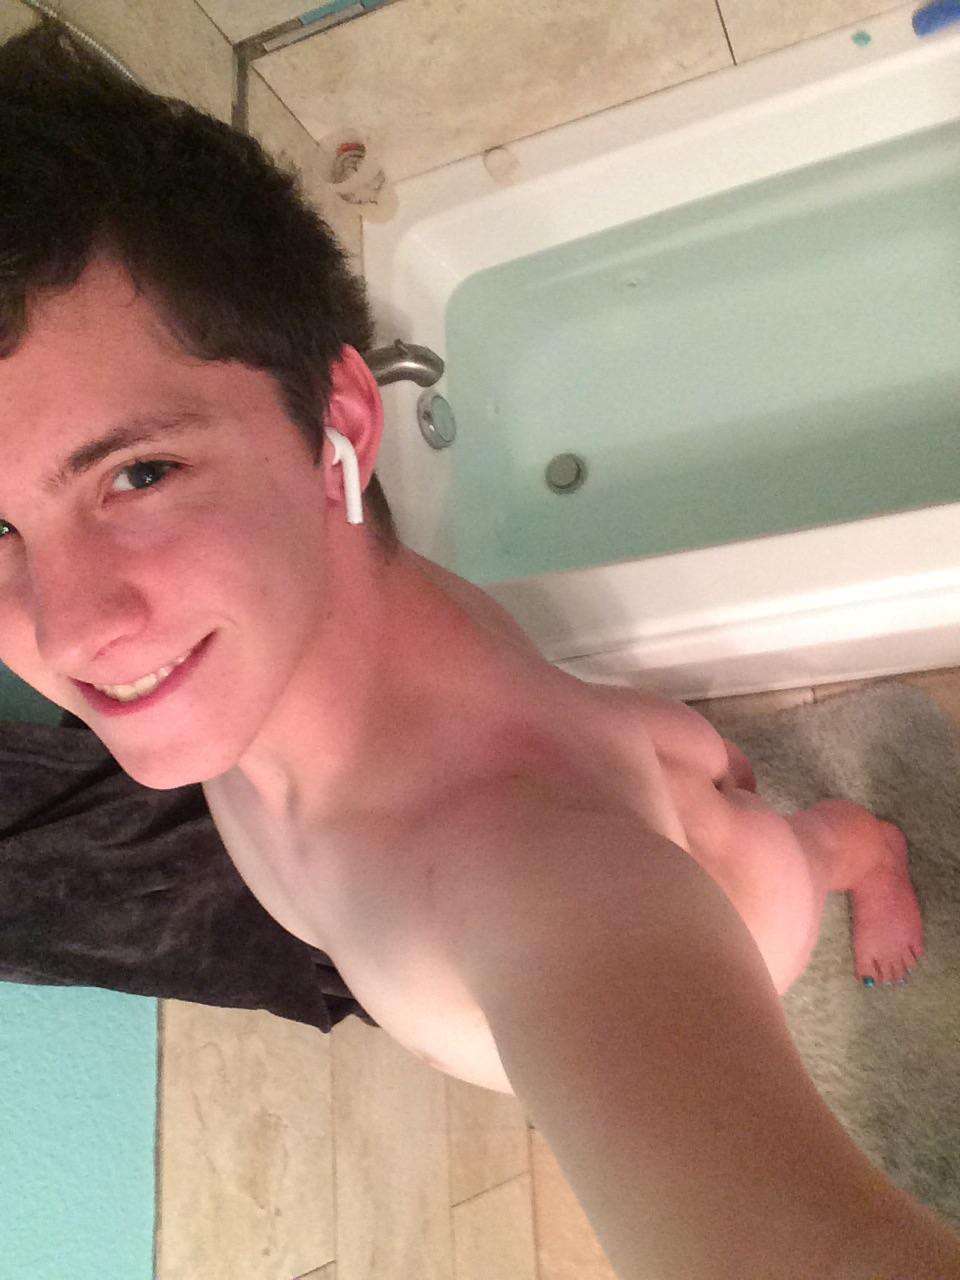 Hey! I just turned 18 and am very excited to start posting here! I’m a complete bottom btw!